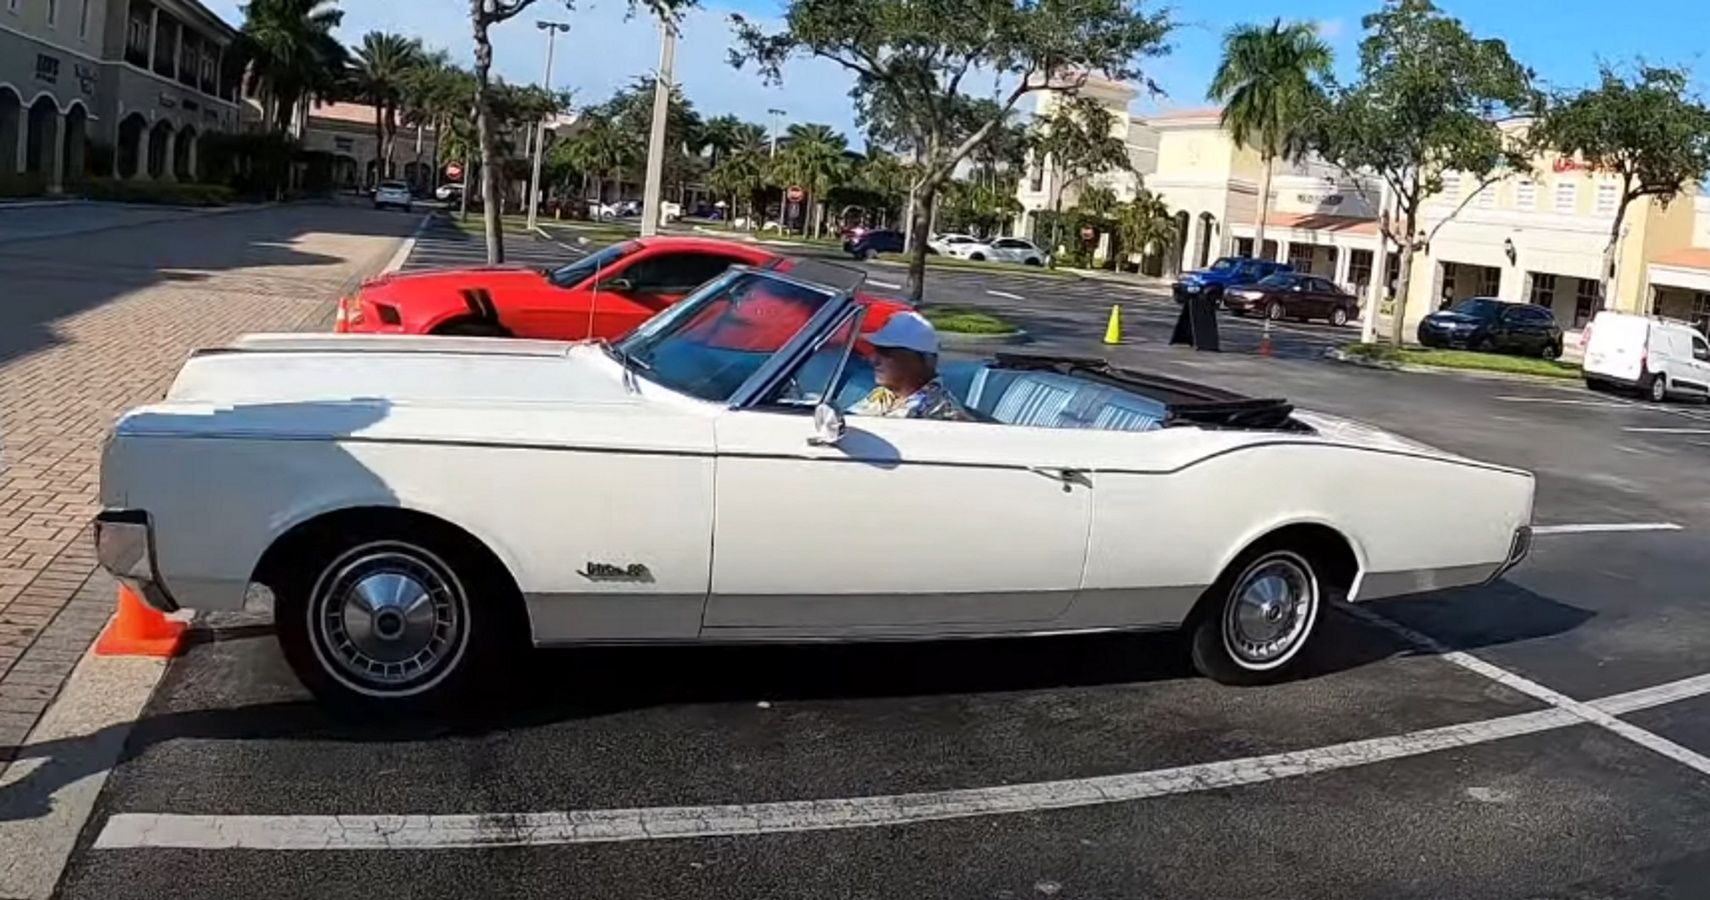 Discover What The Beach Boys, Miss America, And This Rare 1965 Oldsmobile Convertible Have In Common